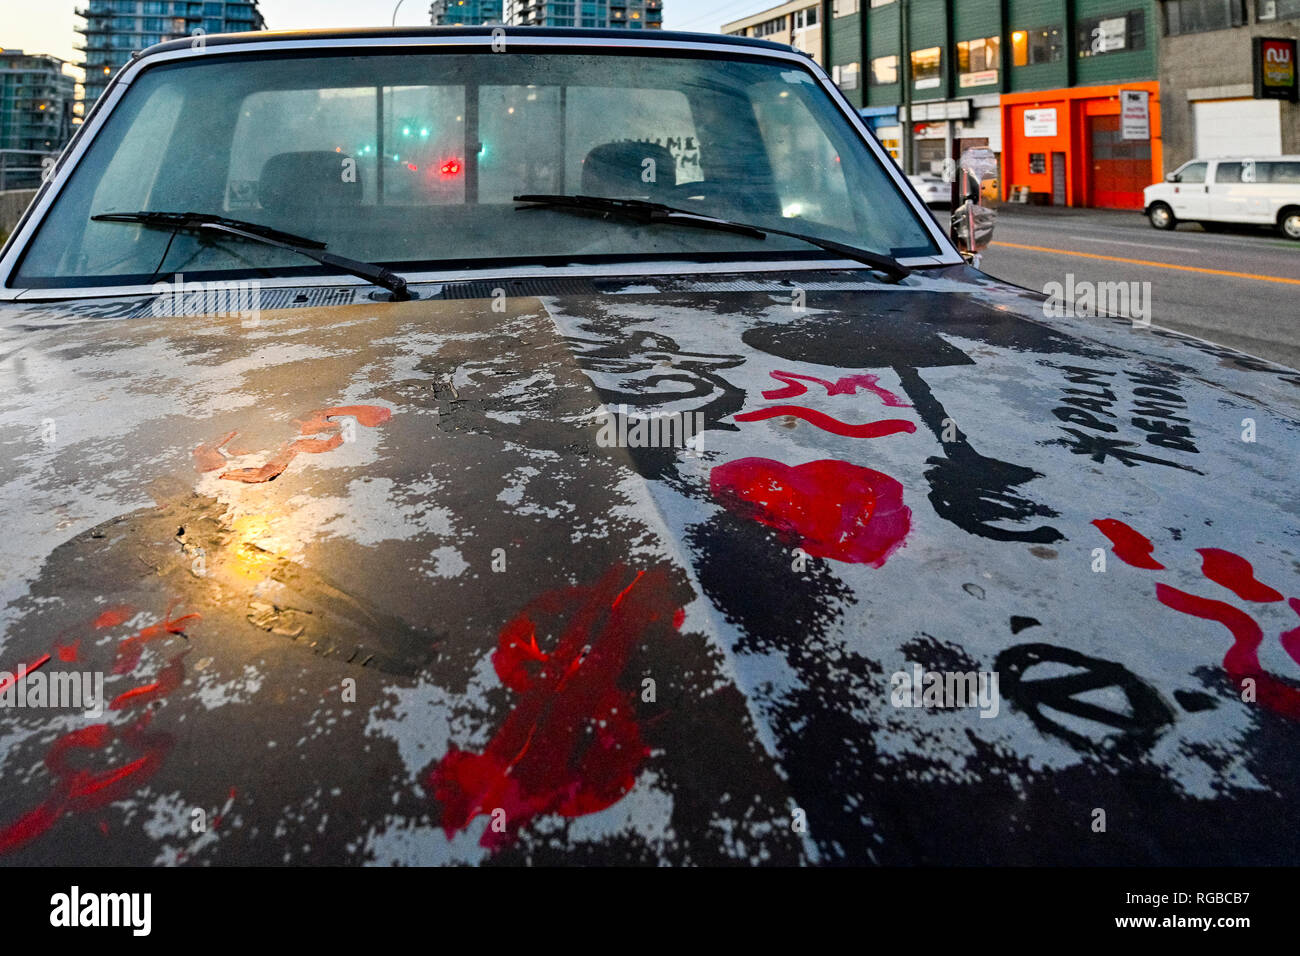 car with symbols painted on hood, bonnet Stock Photo